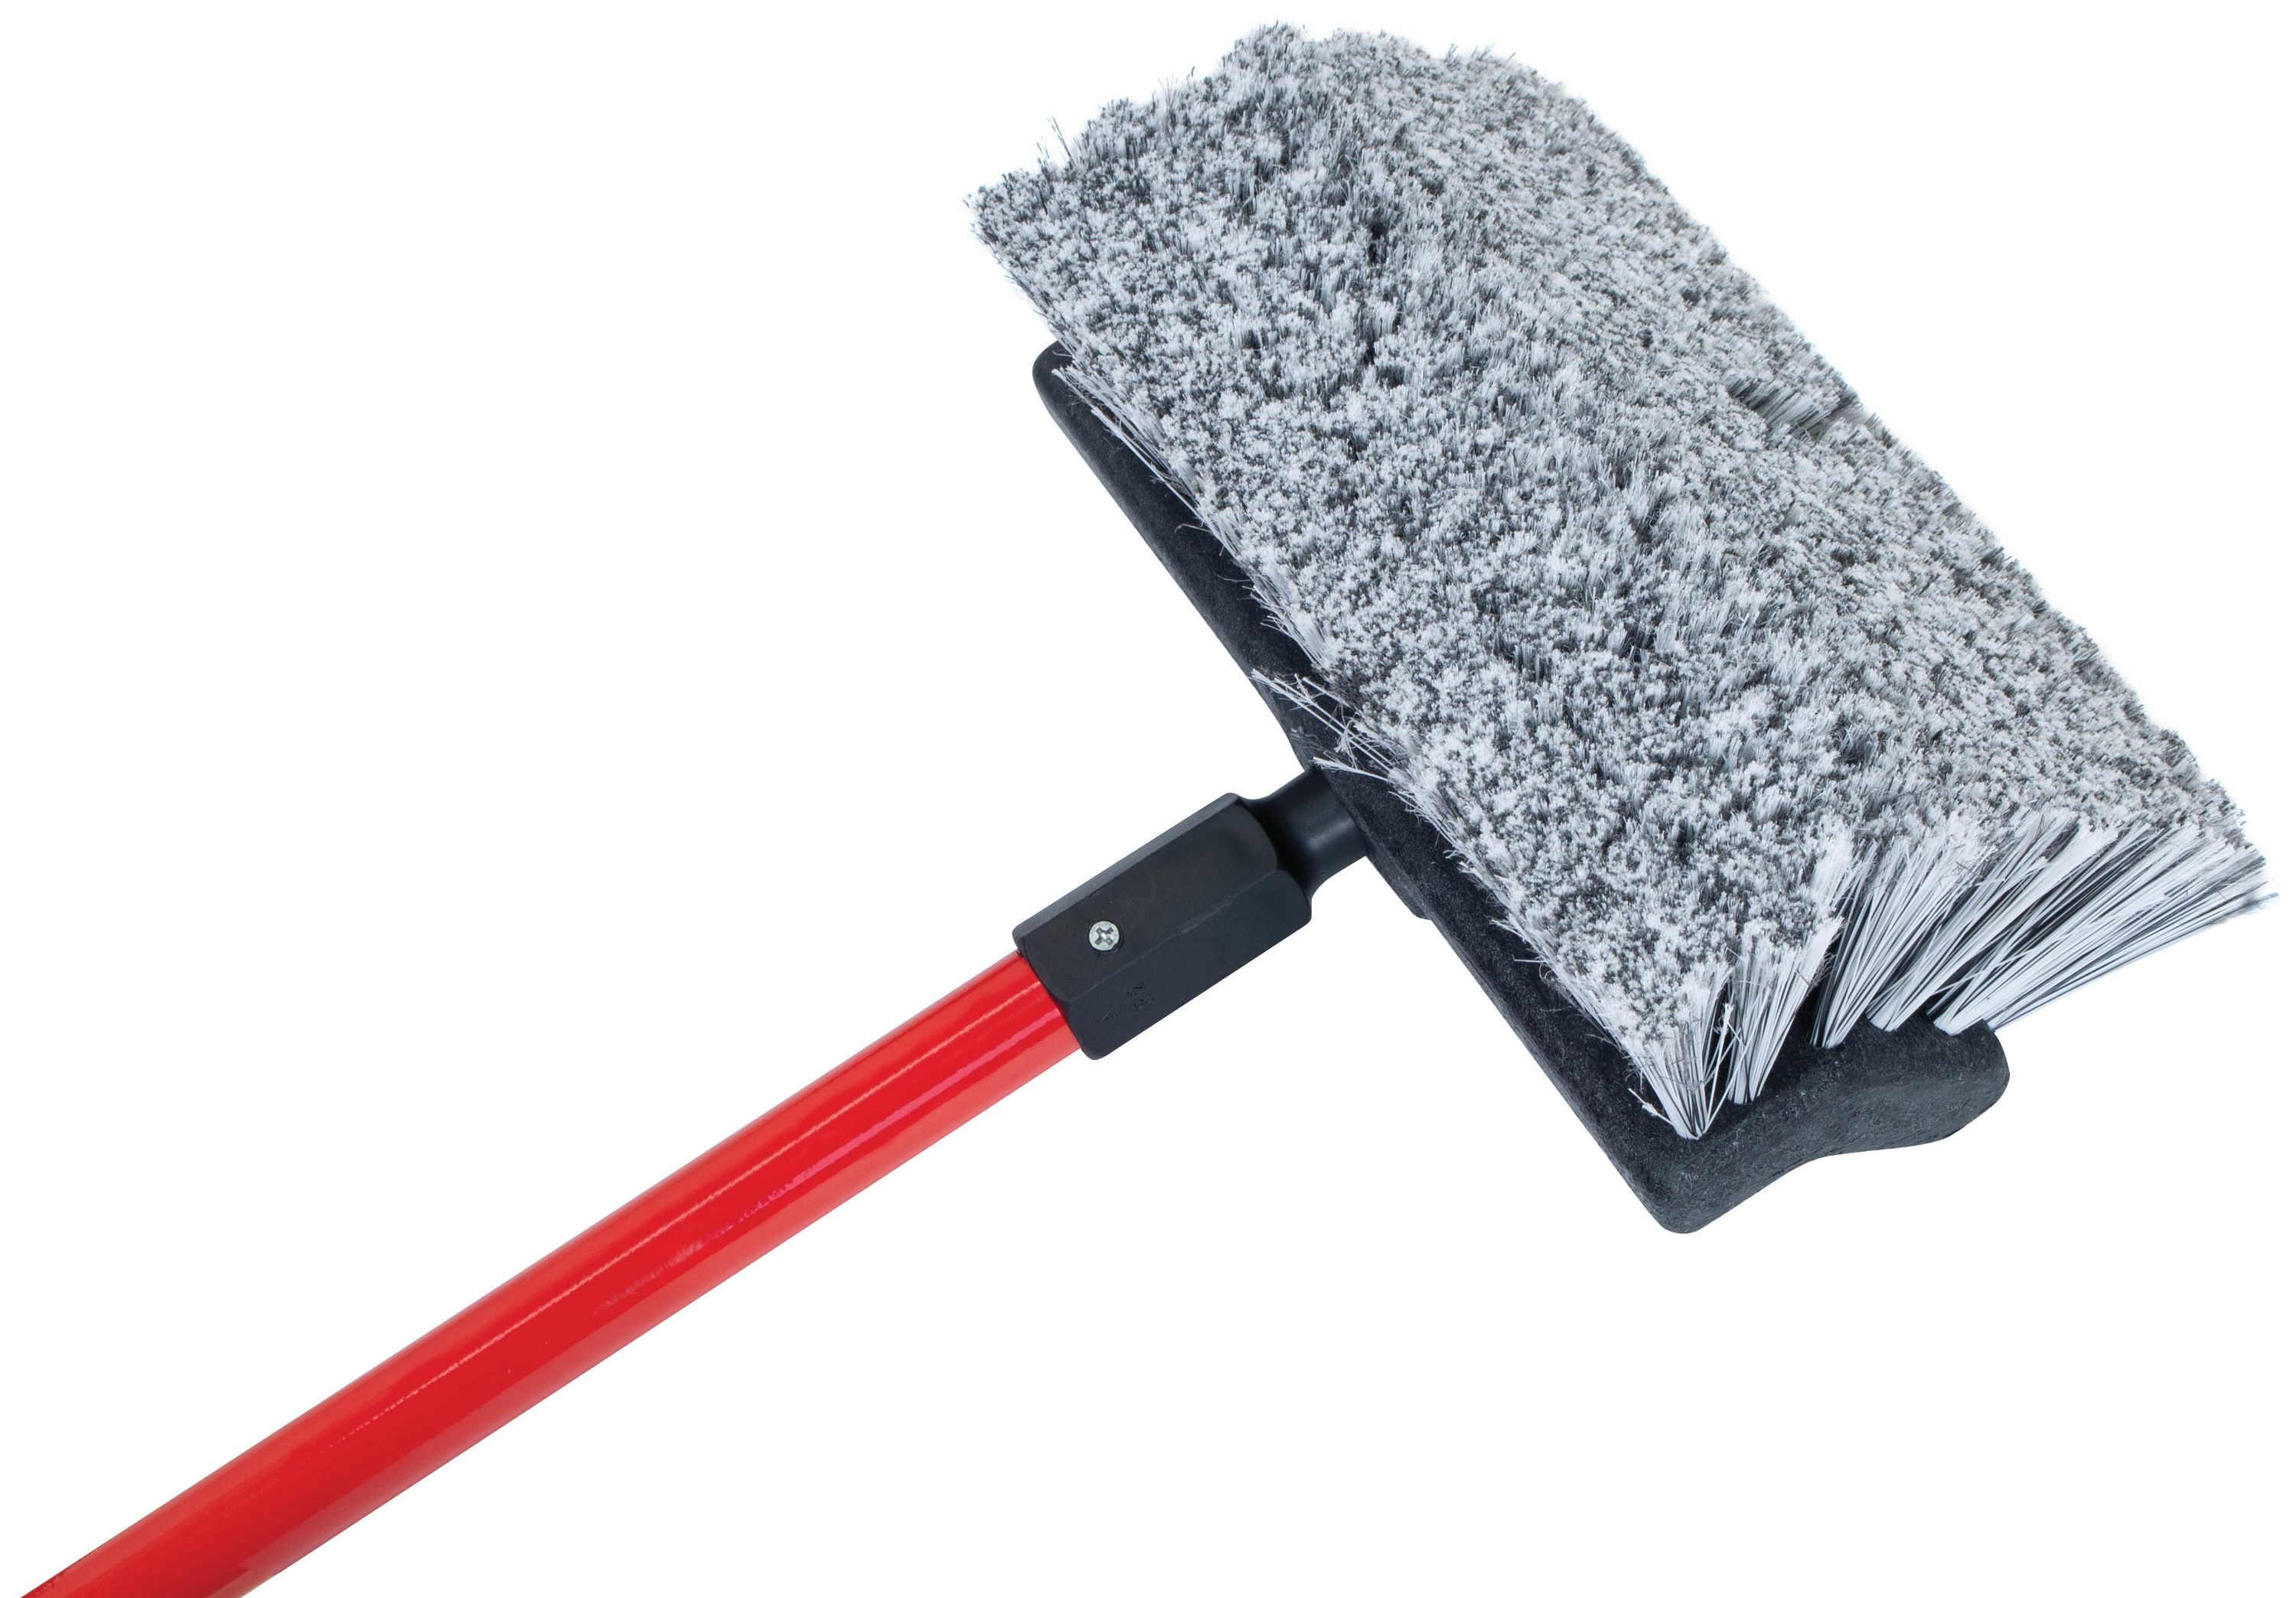 Craftsman Wet Squeegee/Dry Brush Combo